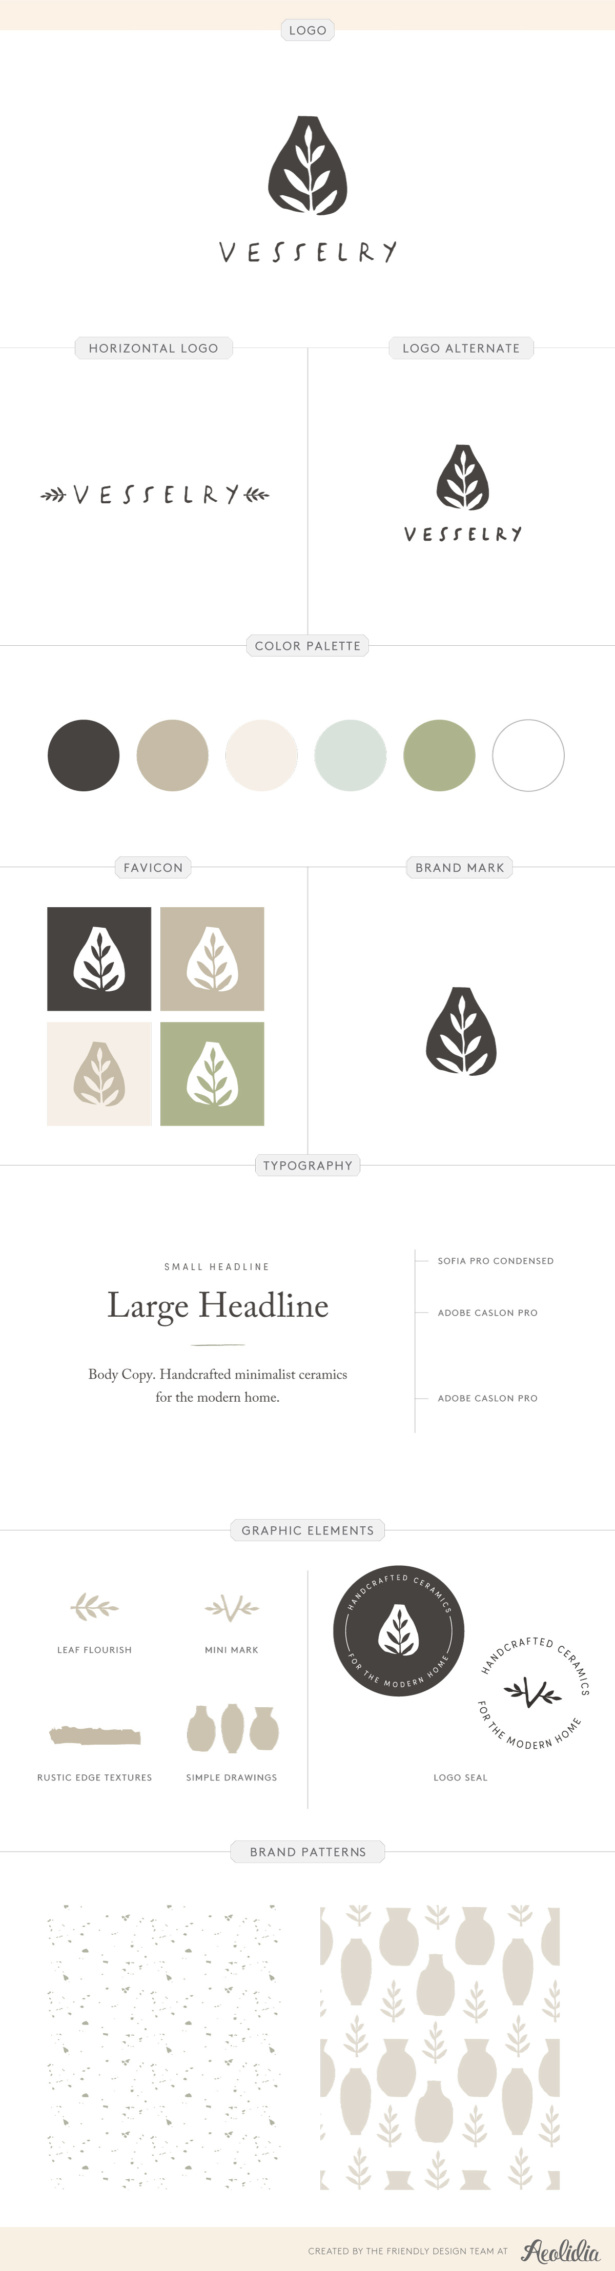 brand style guide for pottery business